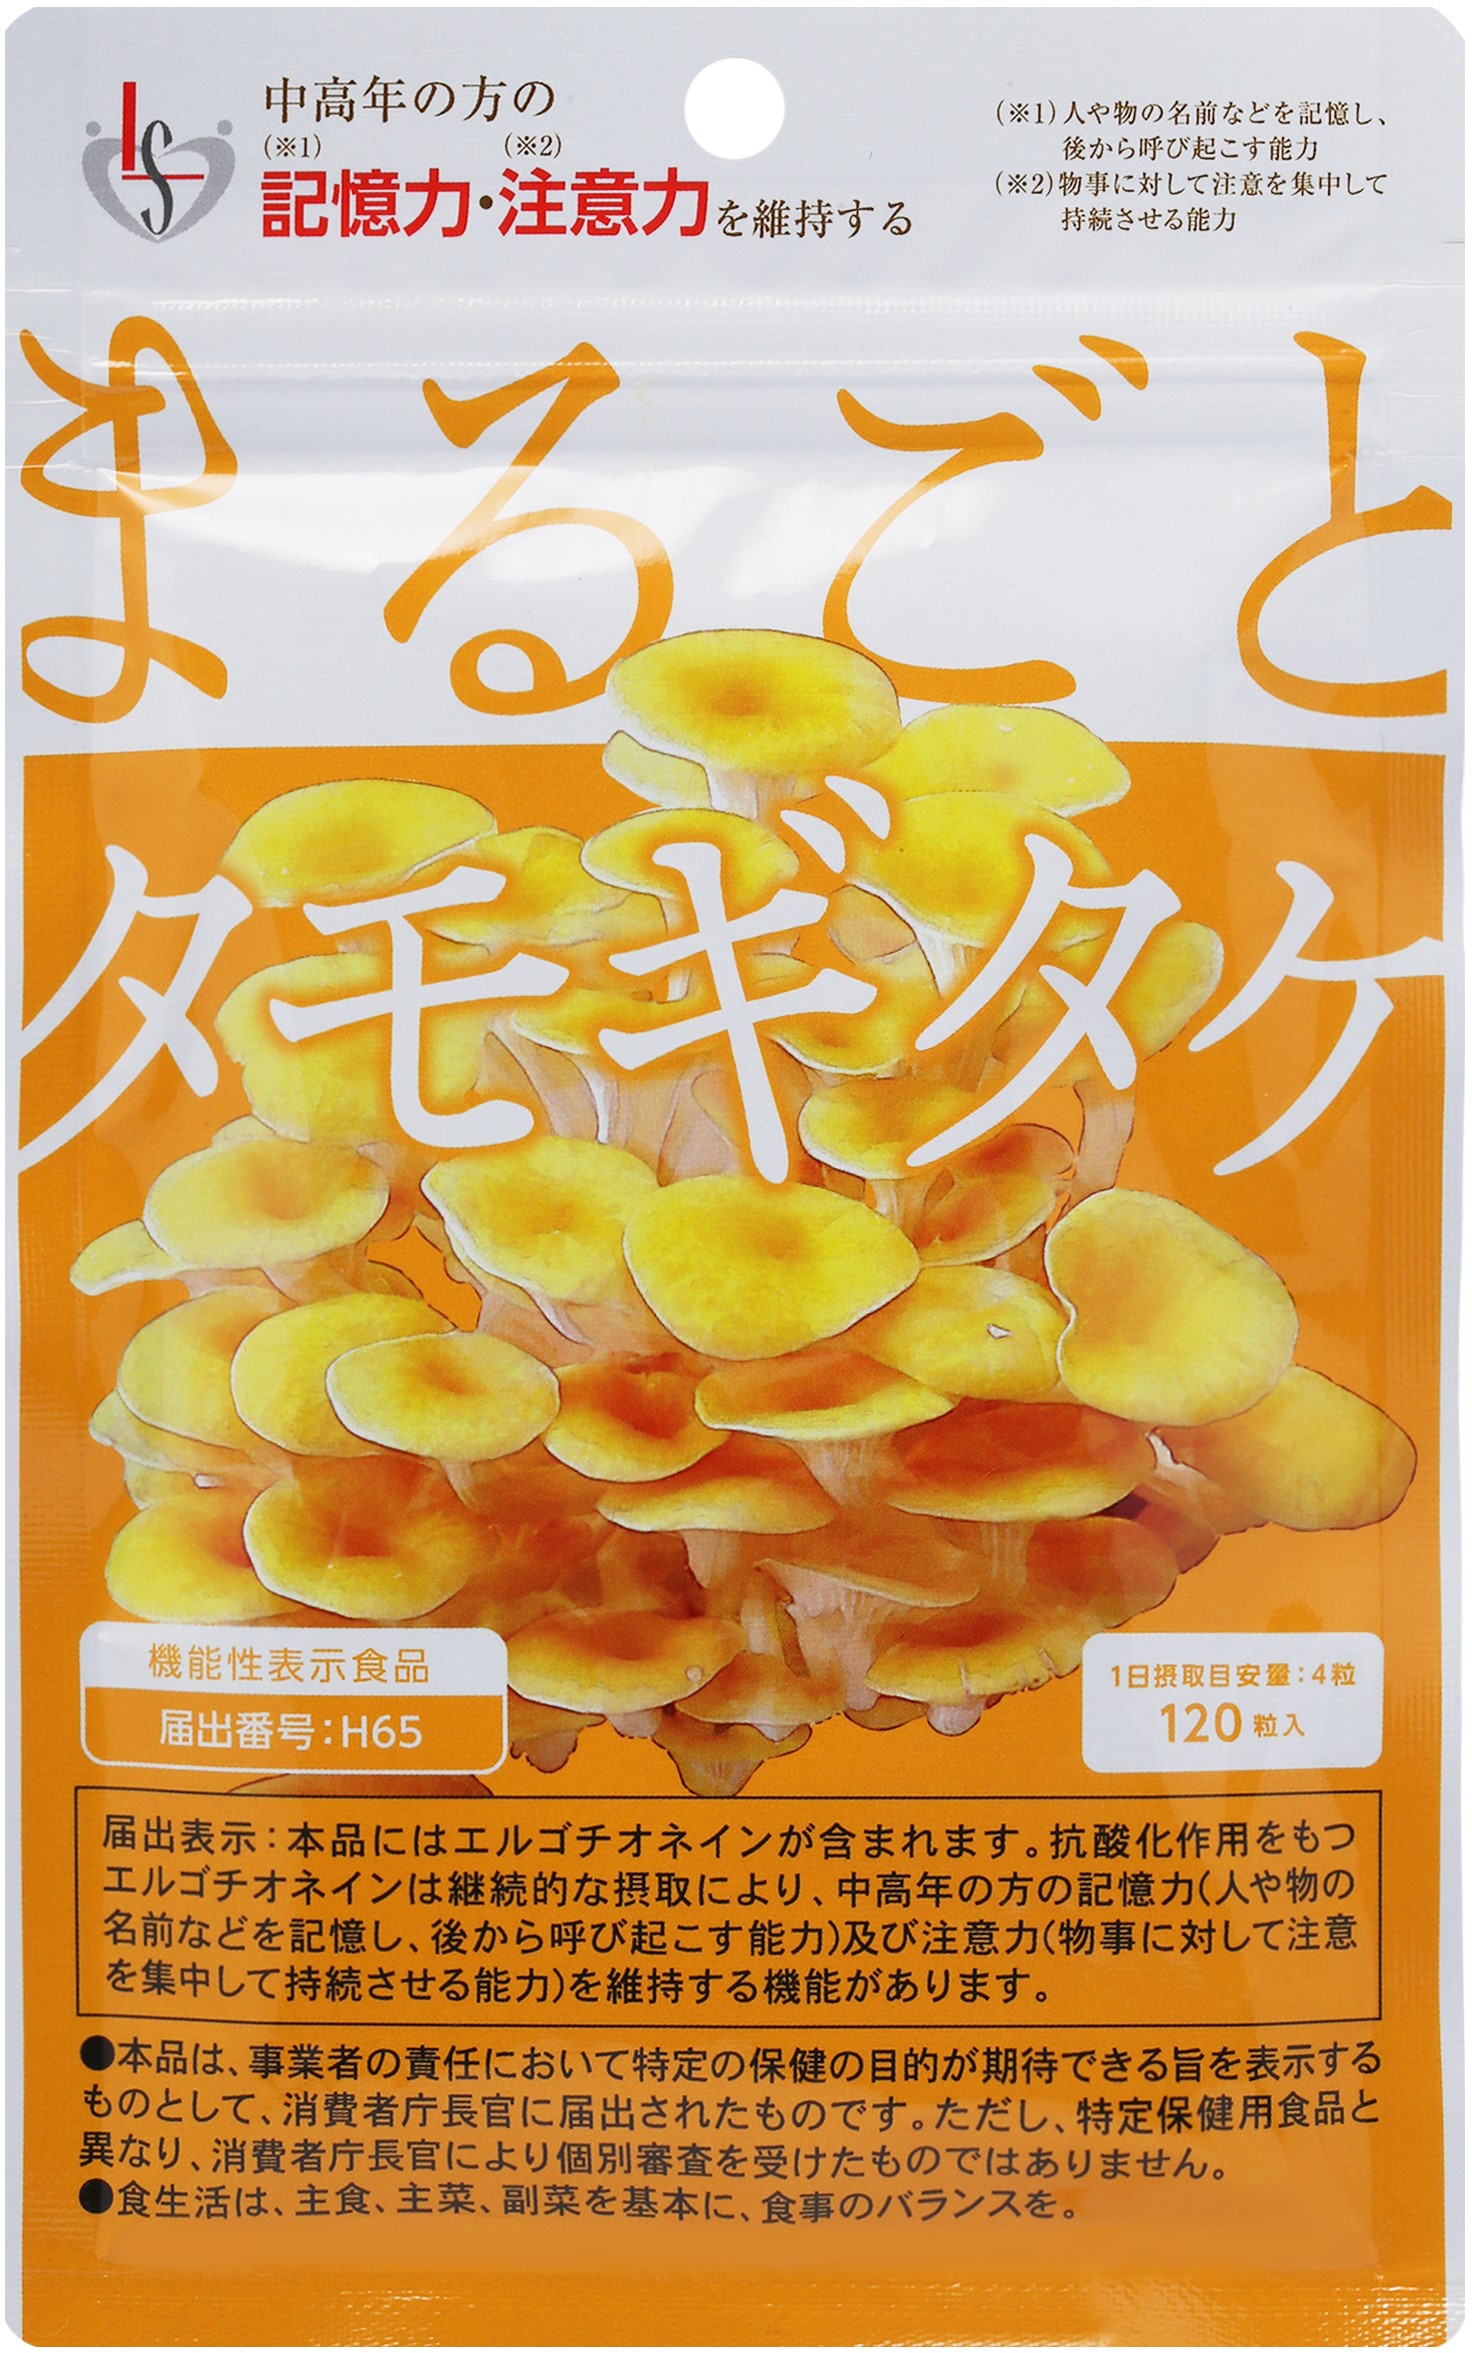 MARUGOTO TAMOGITAKE, Supplement to maintain memory and alertness in middle-aged and elderly people.